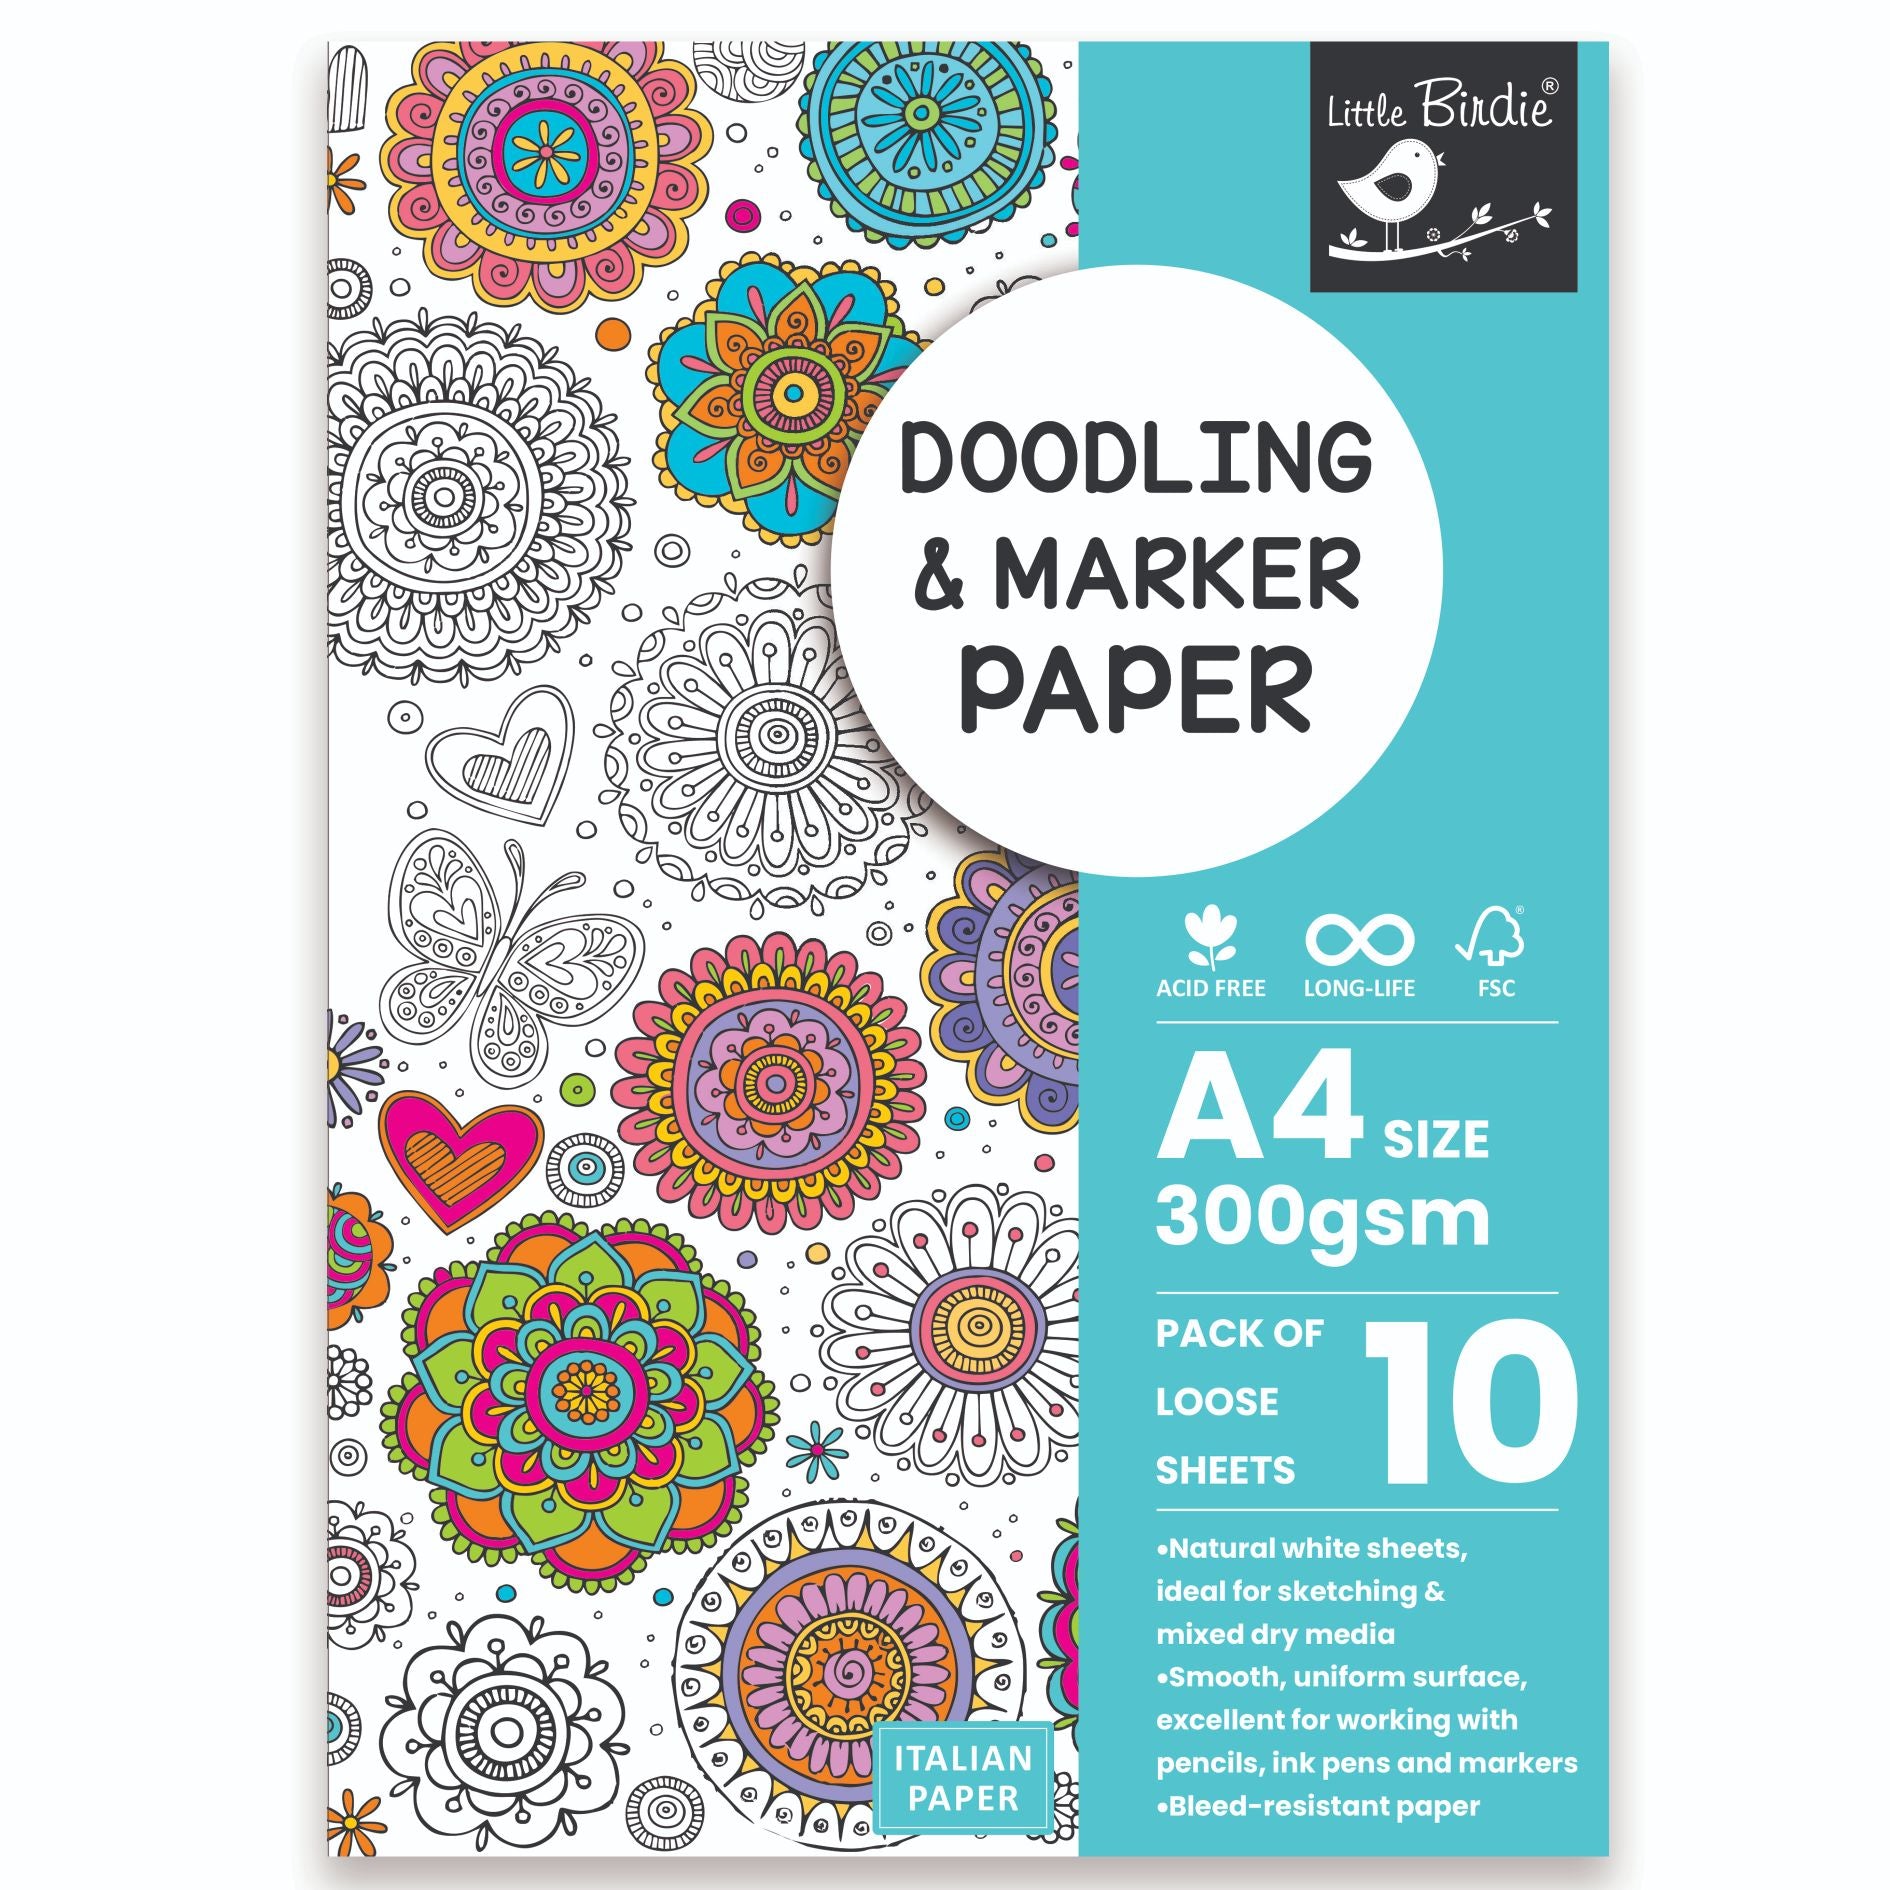 Doodling And Marker Paper A4 Size 300 Gsm Pack Of 10 Sheets Pb Lb